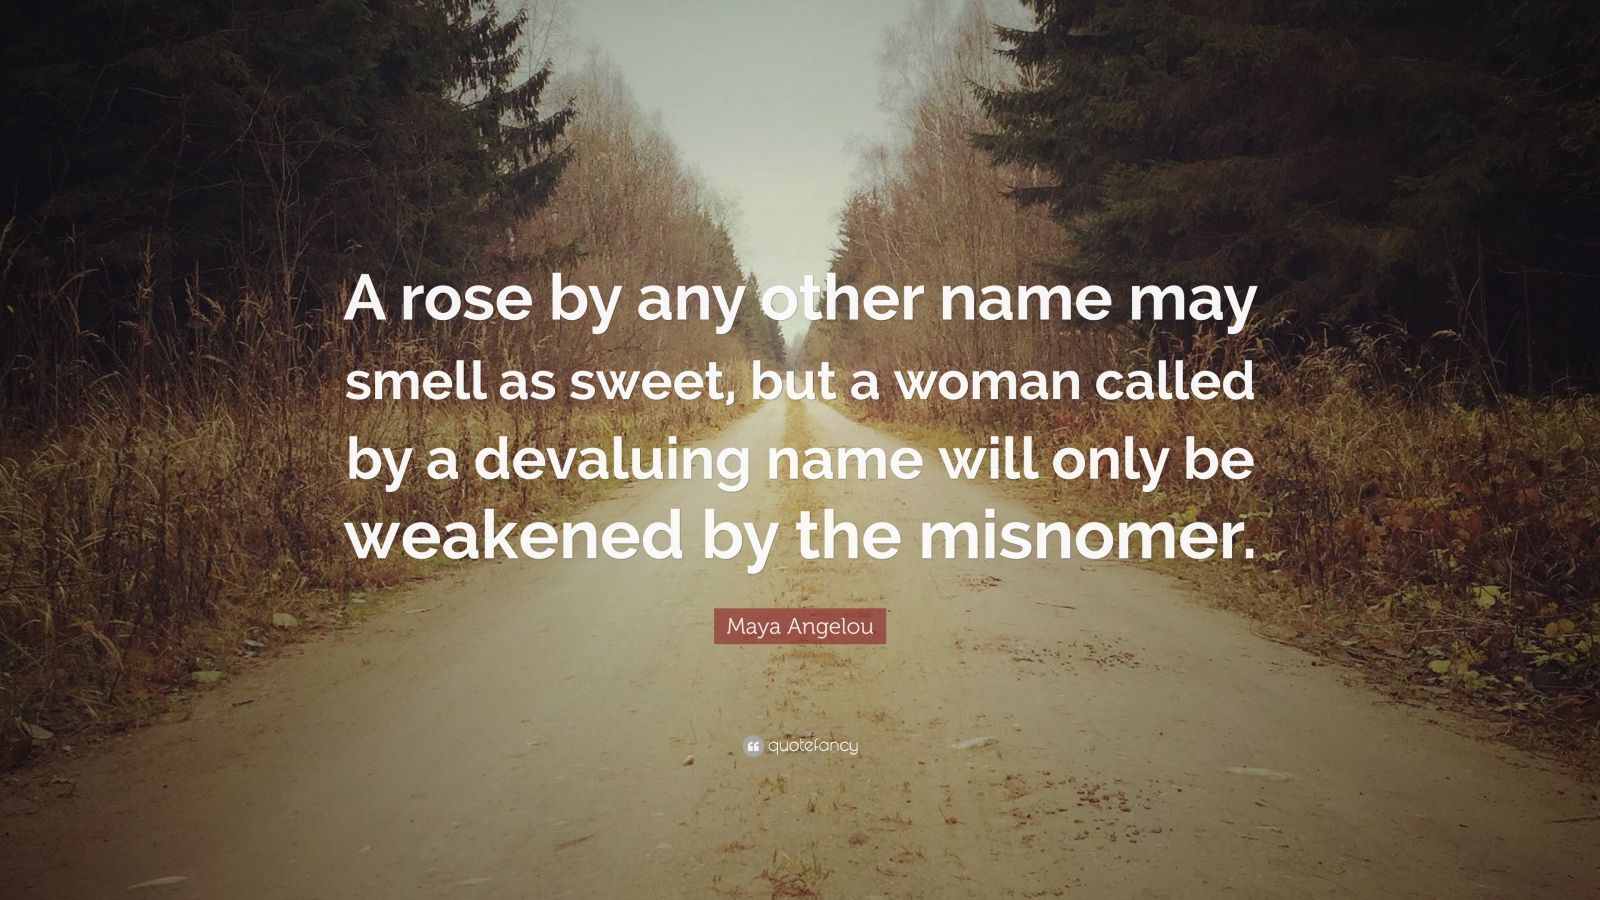 Maya Angelou Quote: “A rose by any other name may smell as sweet, but a